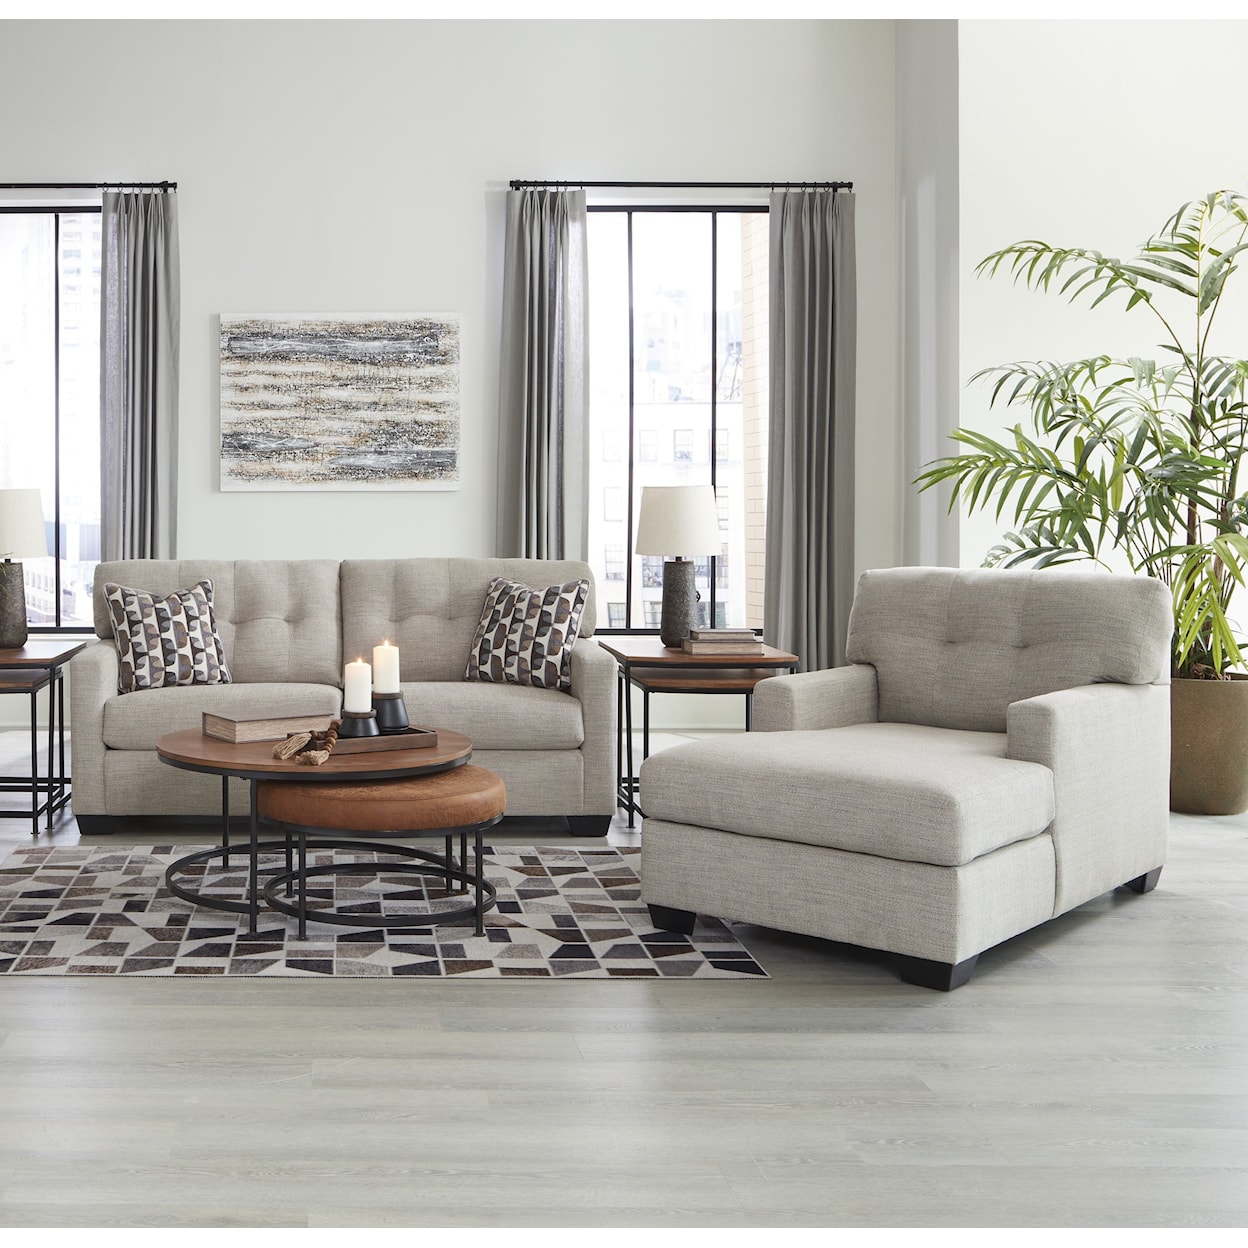 Signature Design by Ashley Mahoney 2 Piece Sofa and Chaise Living Room Set